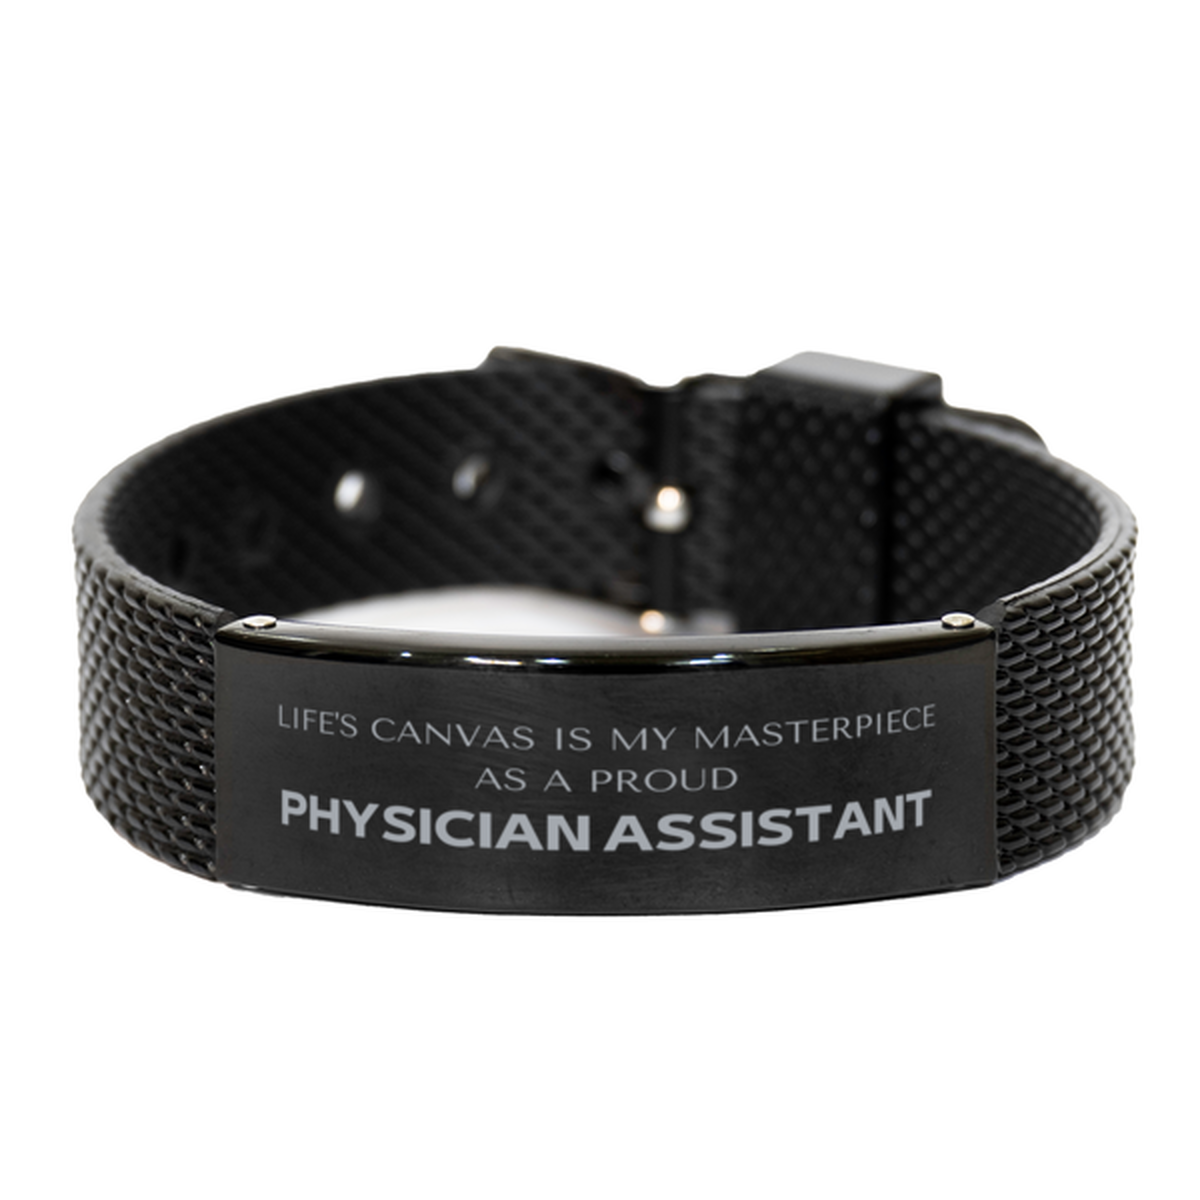 Proud Physician Assistant Gifts, Life's canvas is my masterpiece, Epic Birthday Christmas Unique Black Shark Mesh Bracelet For Physician Assistant, Coworkers, Men, Women, Friends